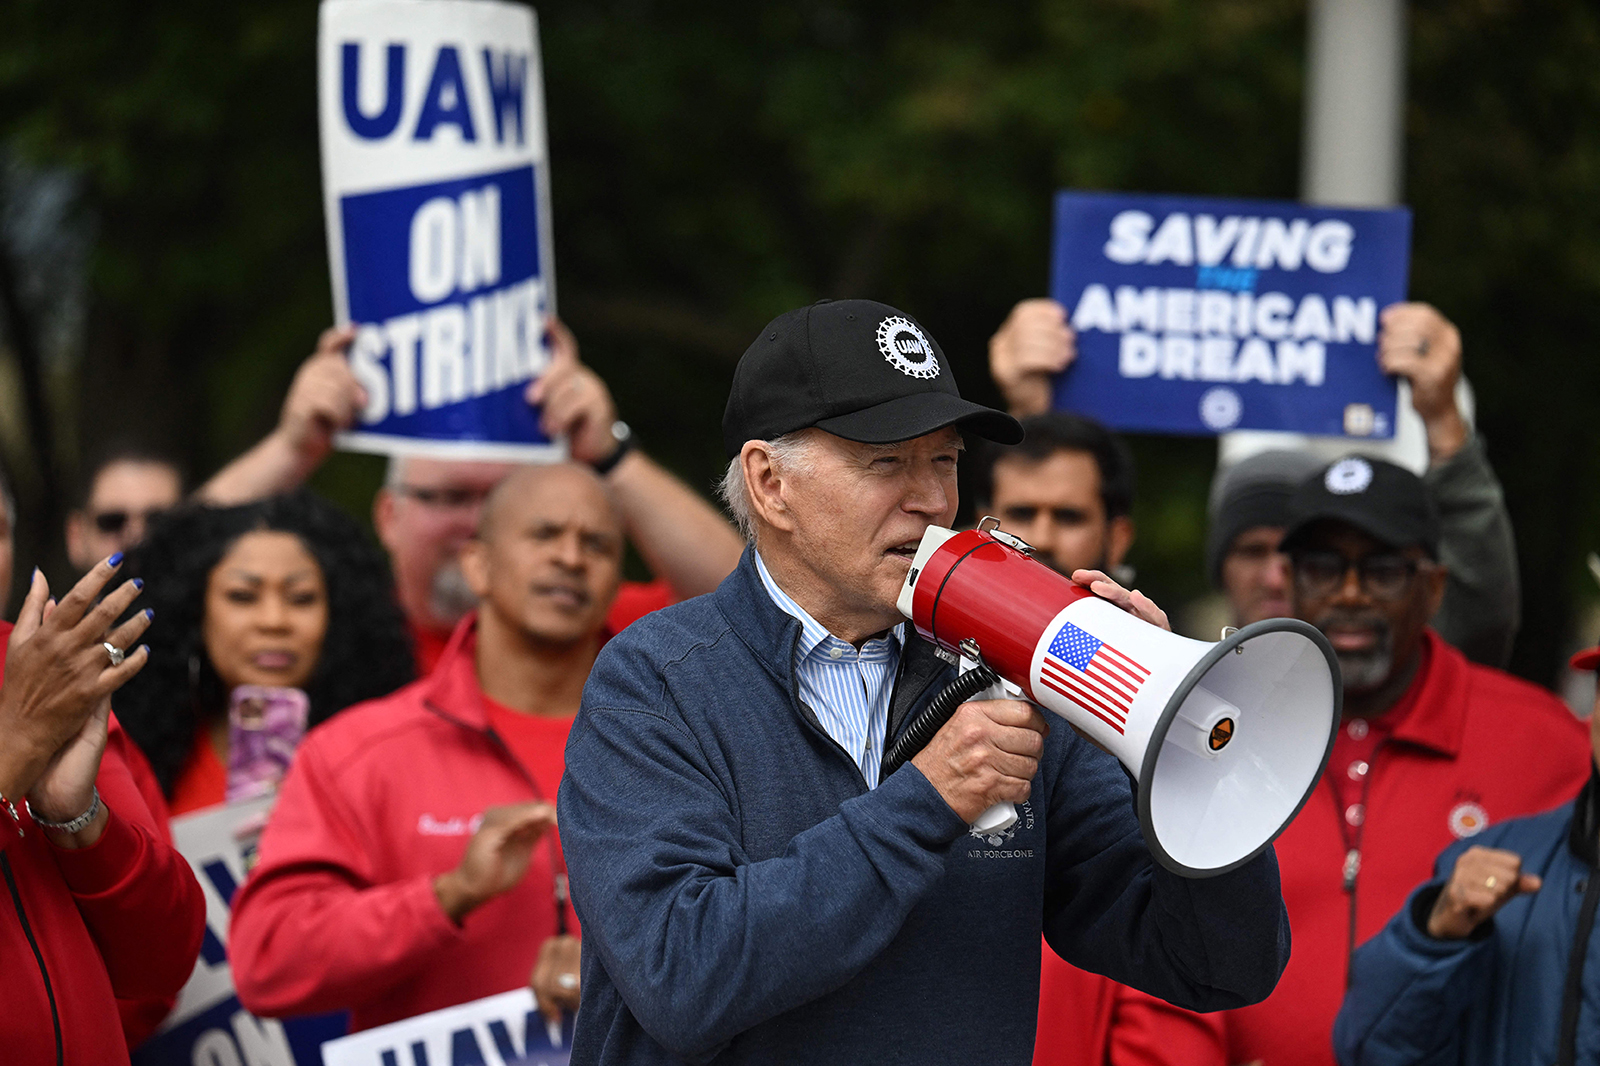 US President Joe Biden addresses striking members of the United Auto Workers (UAW) union at a picket line outside a General Motors Service Parts Operations plant in Belleville, Michigan, on September 26.